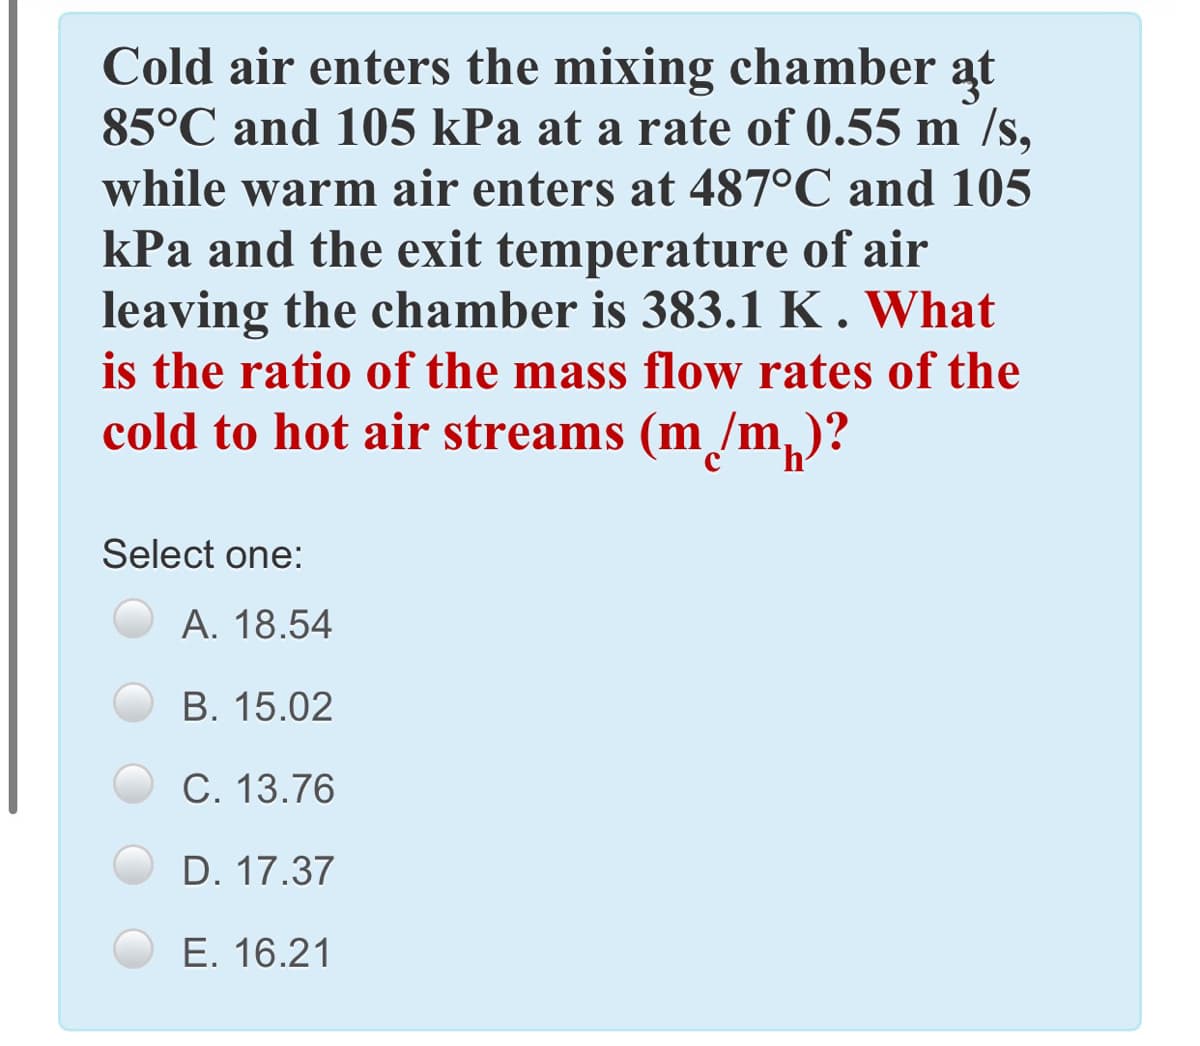 Cold air enters the mixing chamber at
85°C and 105 kPa at a rate of 0.55 m /s,
while warm air enters at 487°C and 105
kPa and the exit temperature of air
leaving the chamber is 383.1 K . What
is the ratio of the mass flow rates of the
cold to hot air streams (m /m,
Select one:
А. 18.54
В. 15.02
C. 13.76
D. 17.37
E. 16.21
